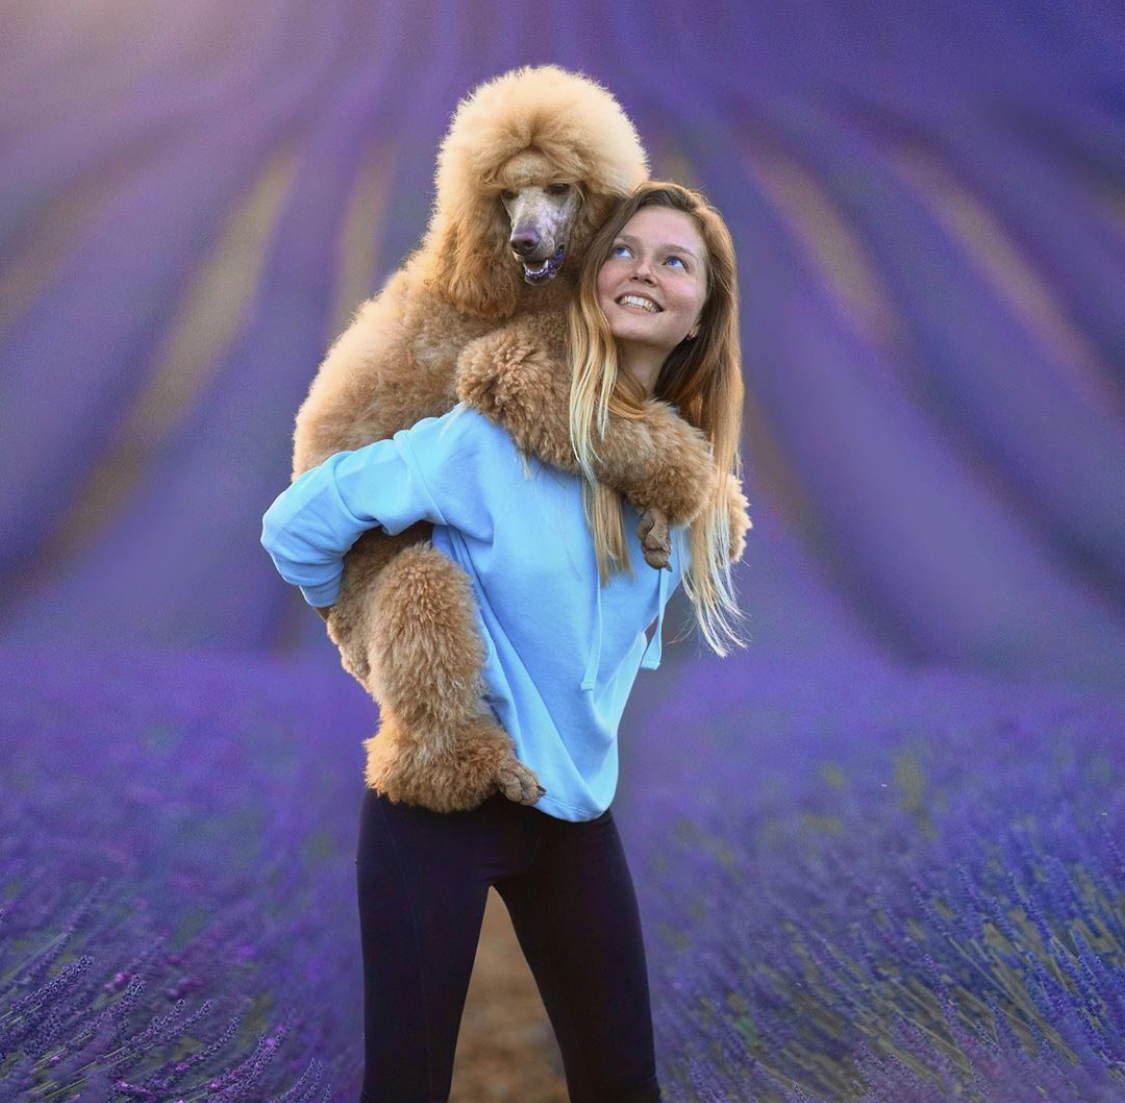 A woman carrying a Poodle on its back